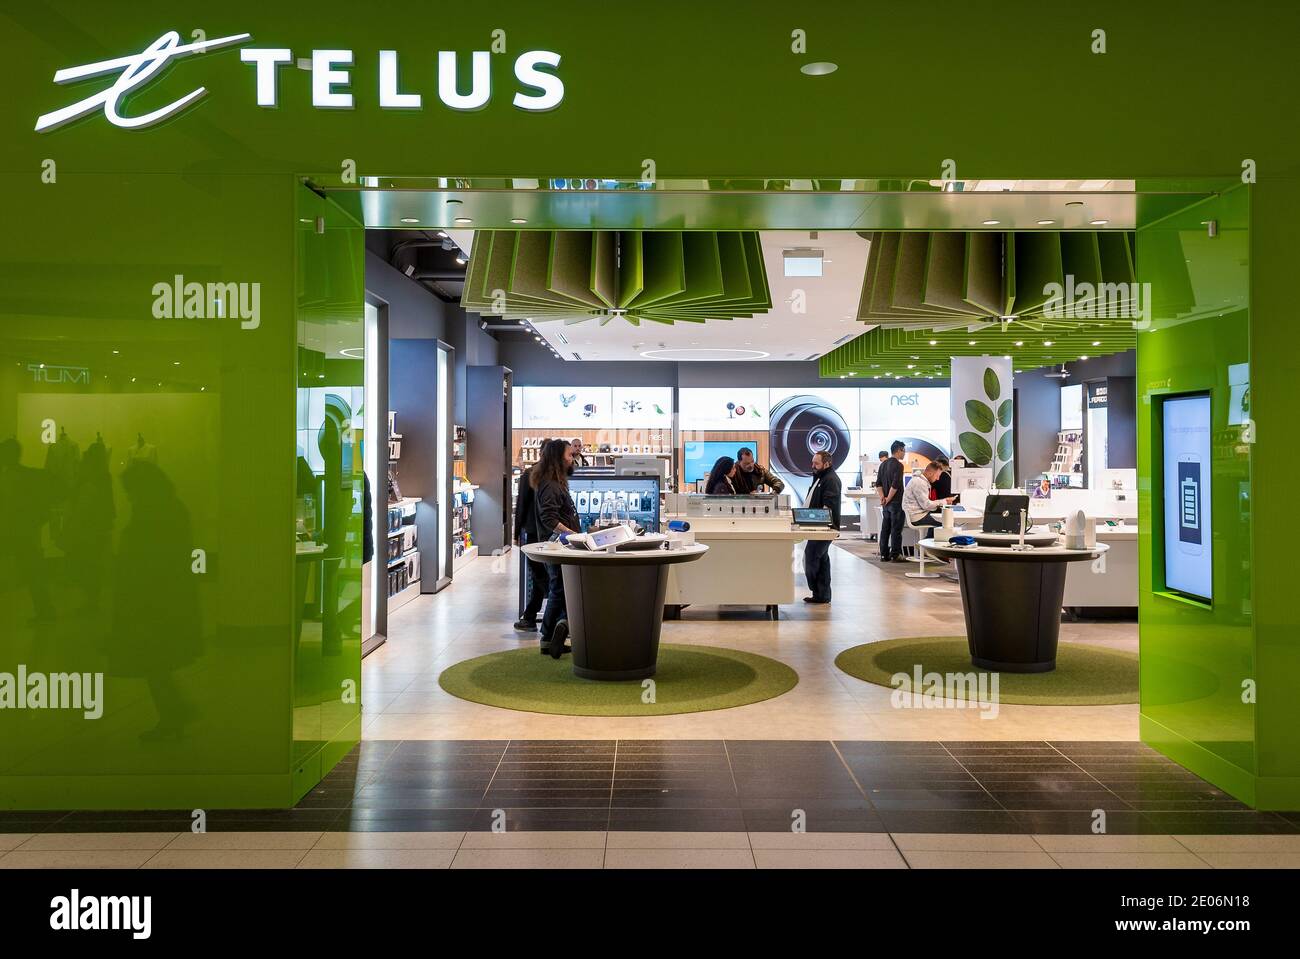 Telus store entrance in Eaton Center. Telus Corporation is a Canadian national telecommunications company that provides a wide range of telecommunicat Stock Photo